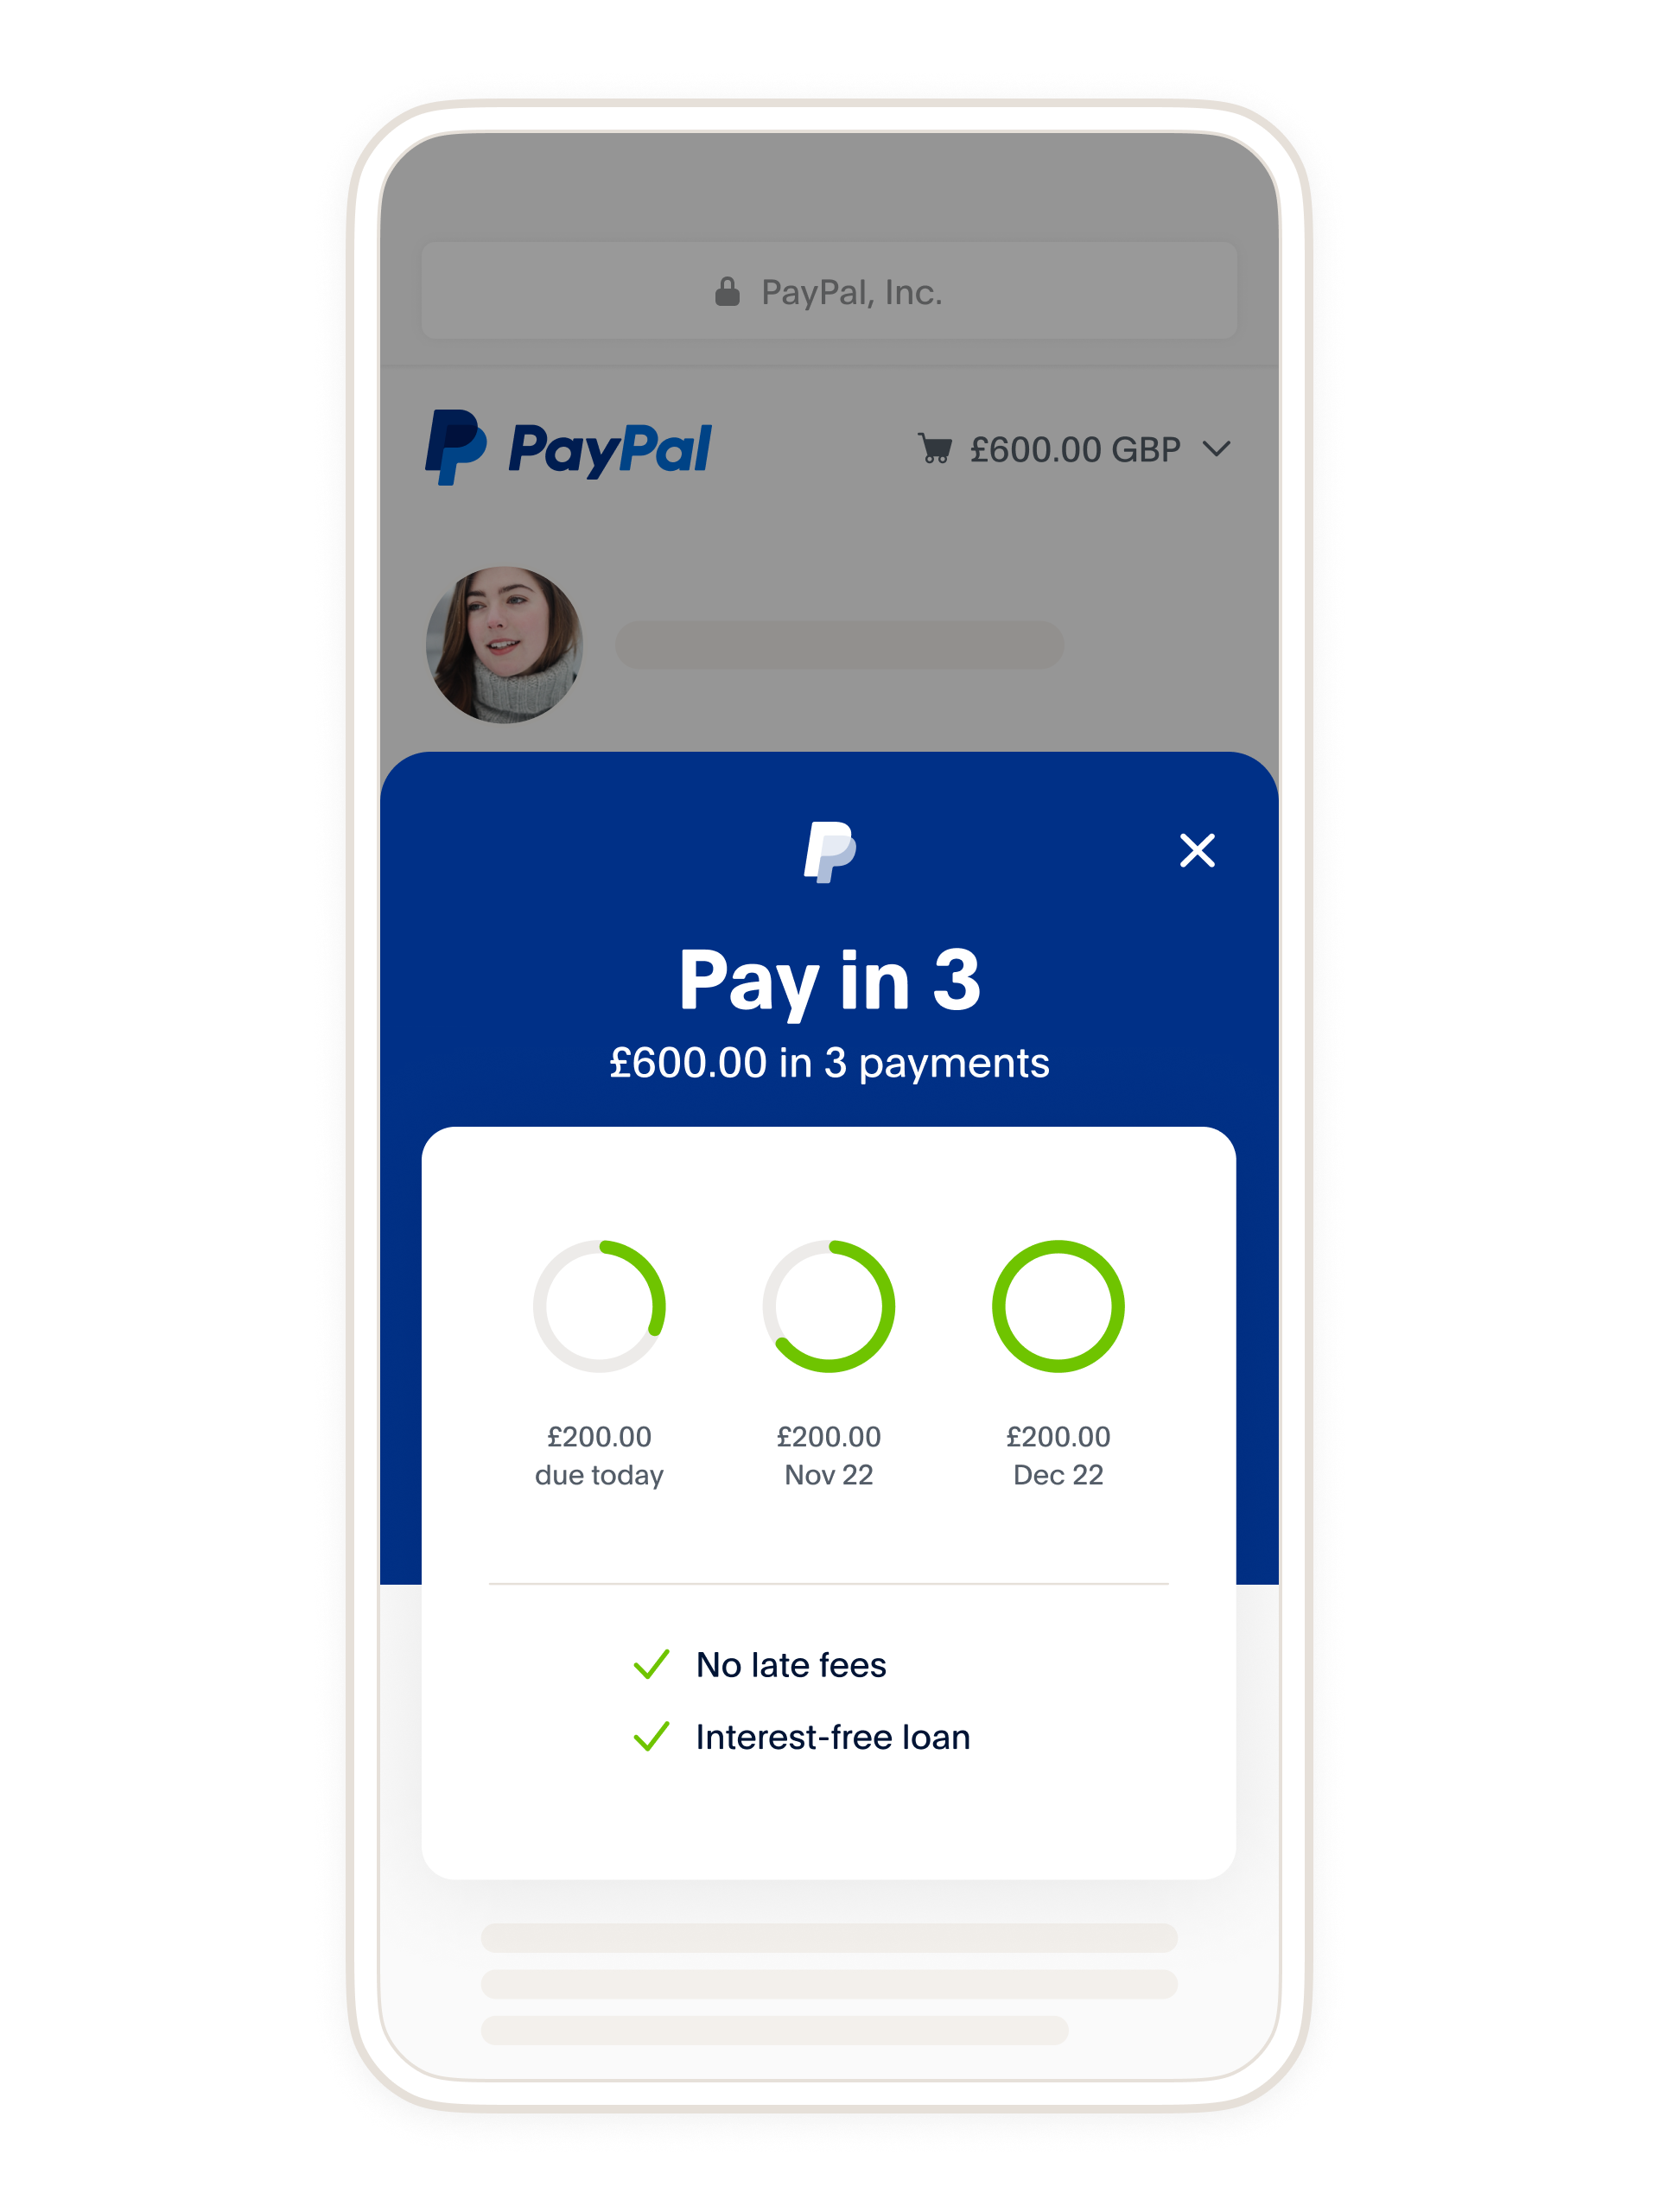 Sites that offer Buy Now, Pay Later | PayPal UK